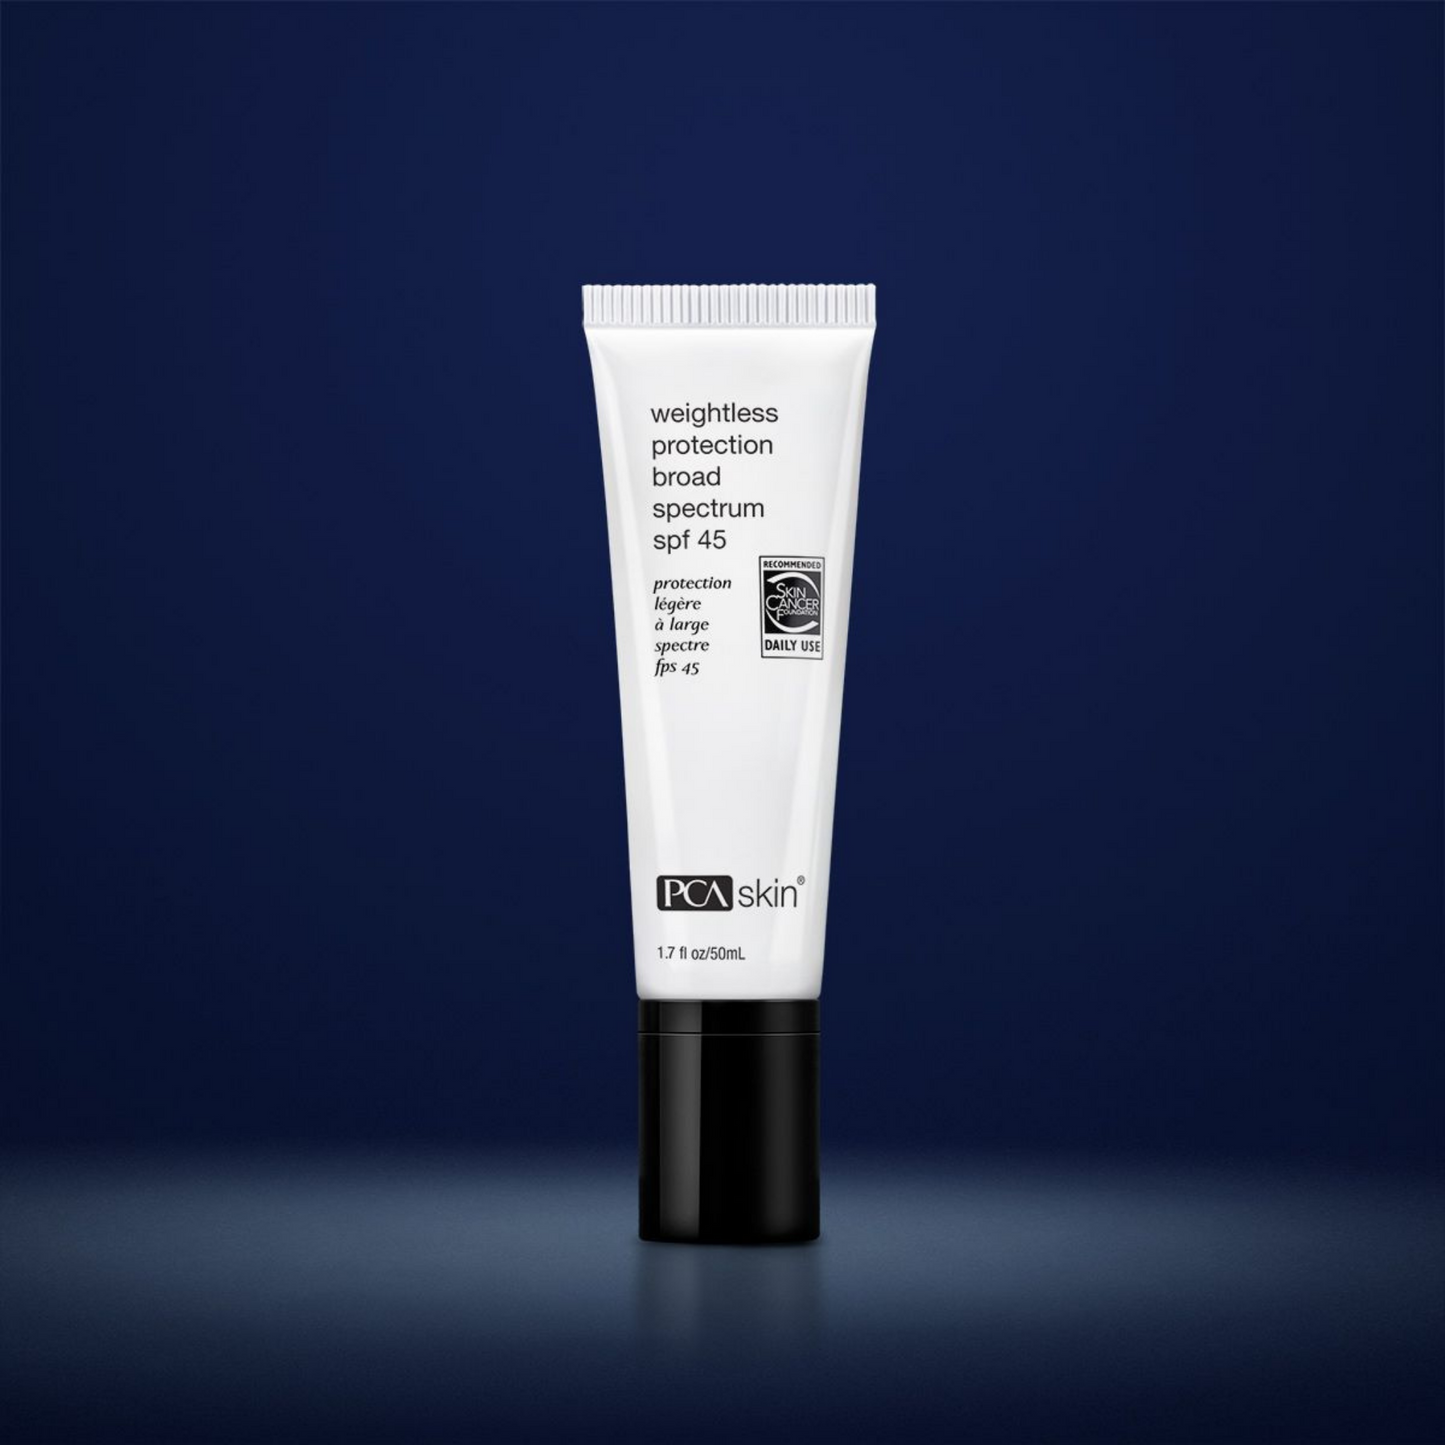 Weightless Protection Broad Spectrum SPF 45 | PCA Skin